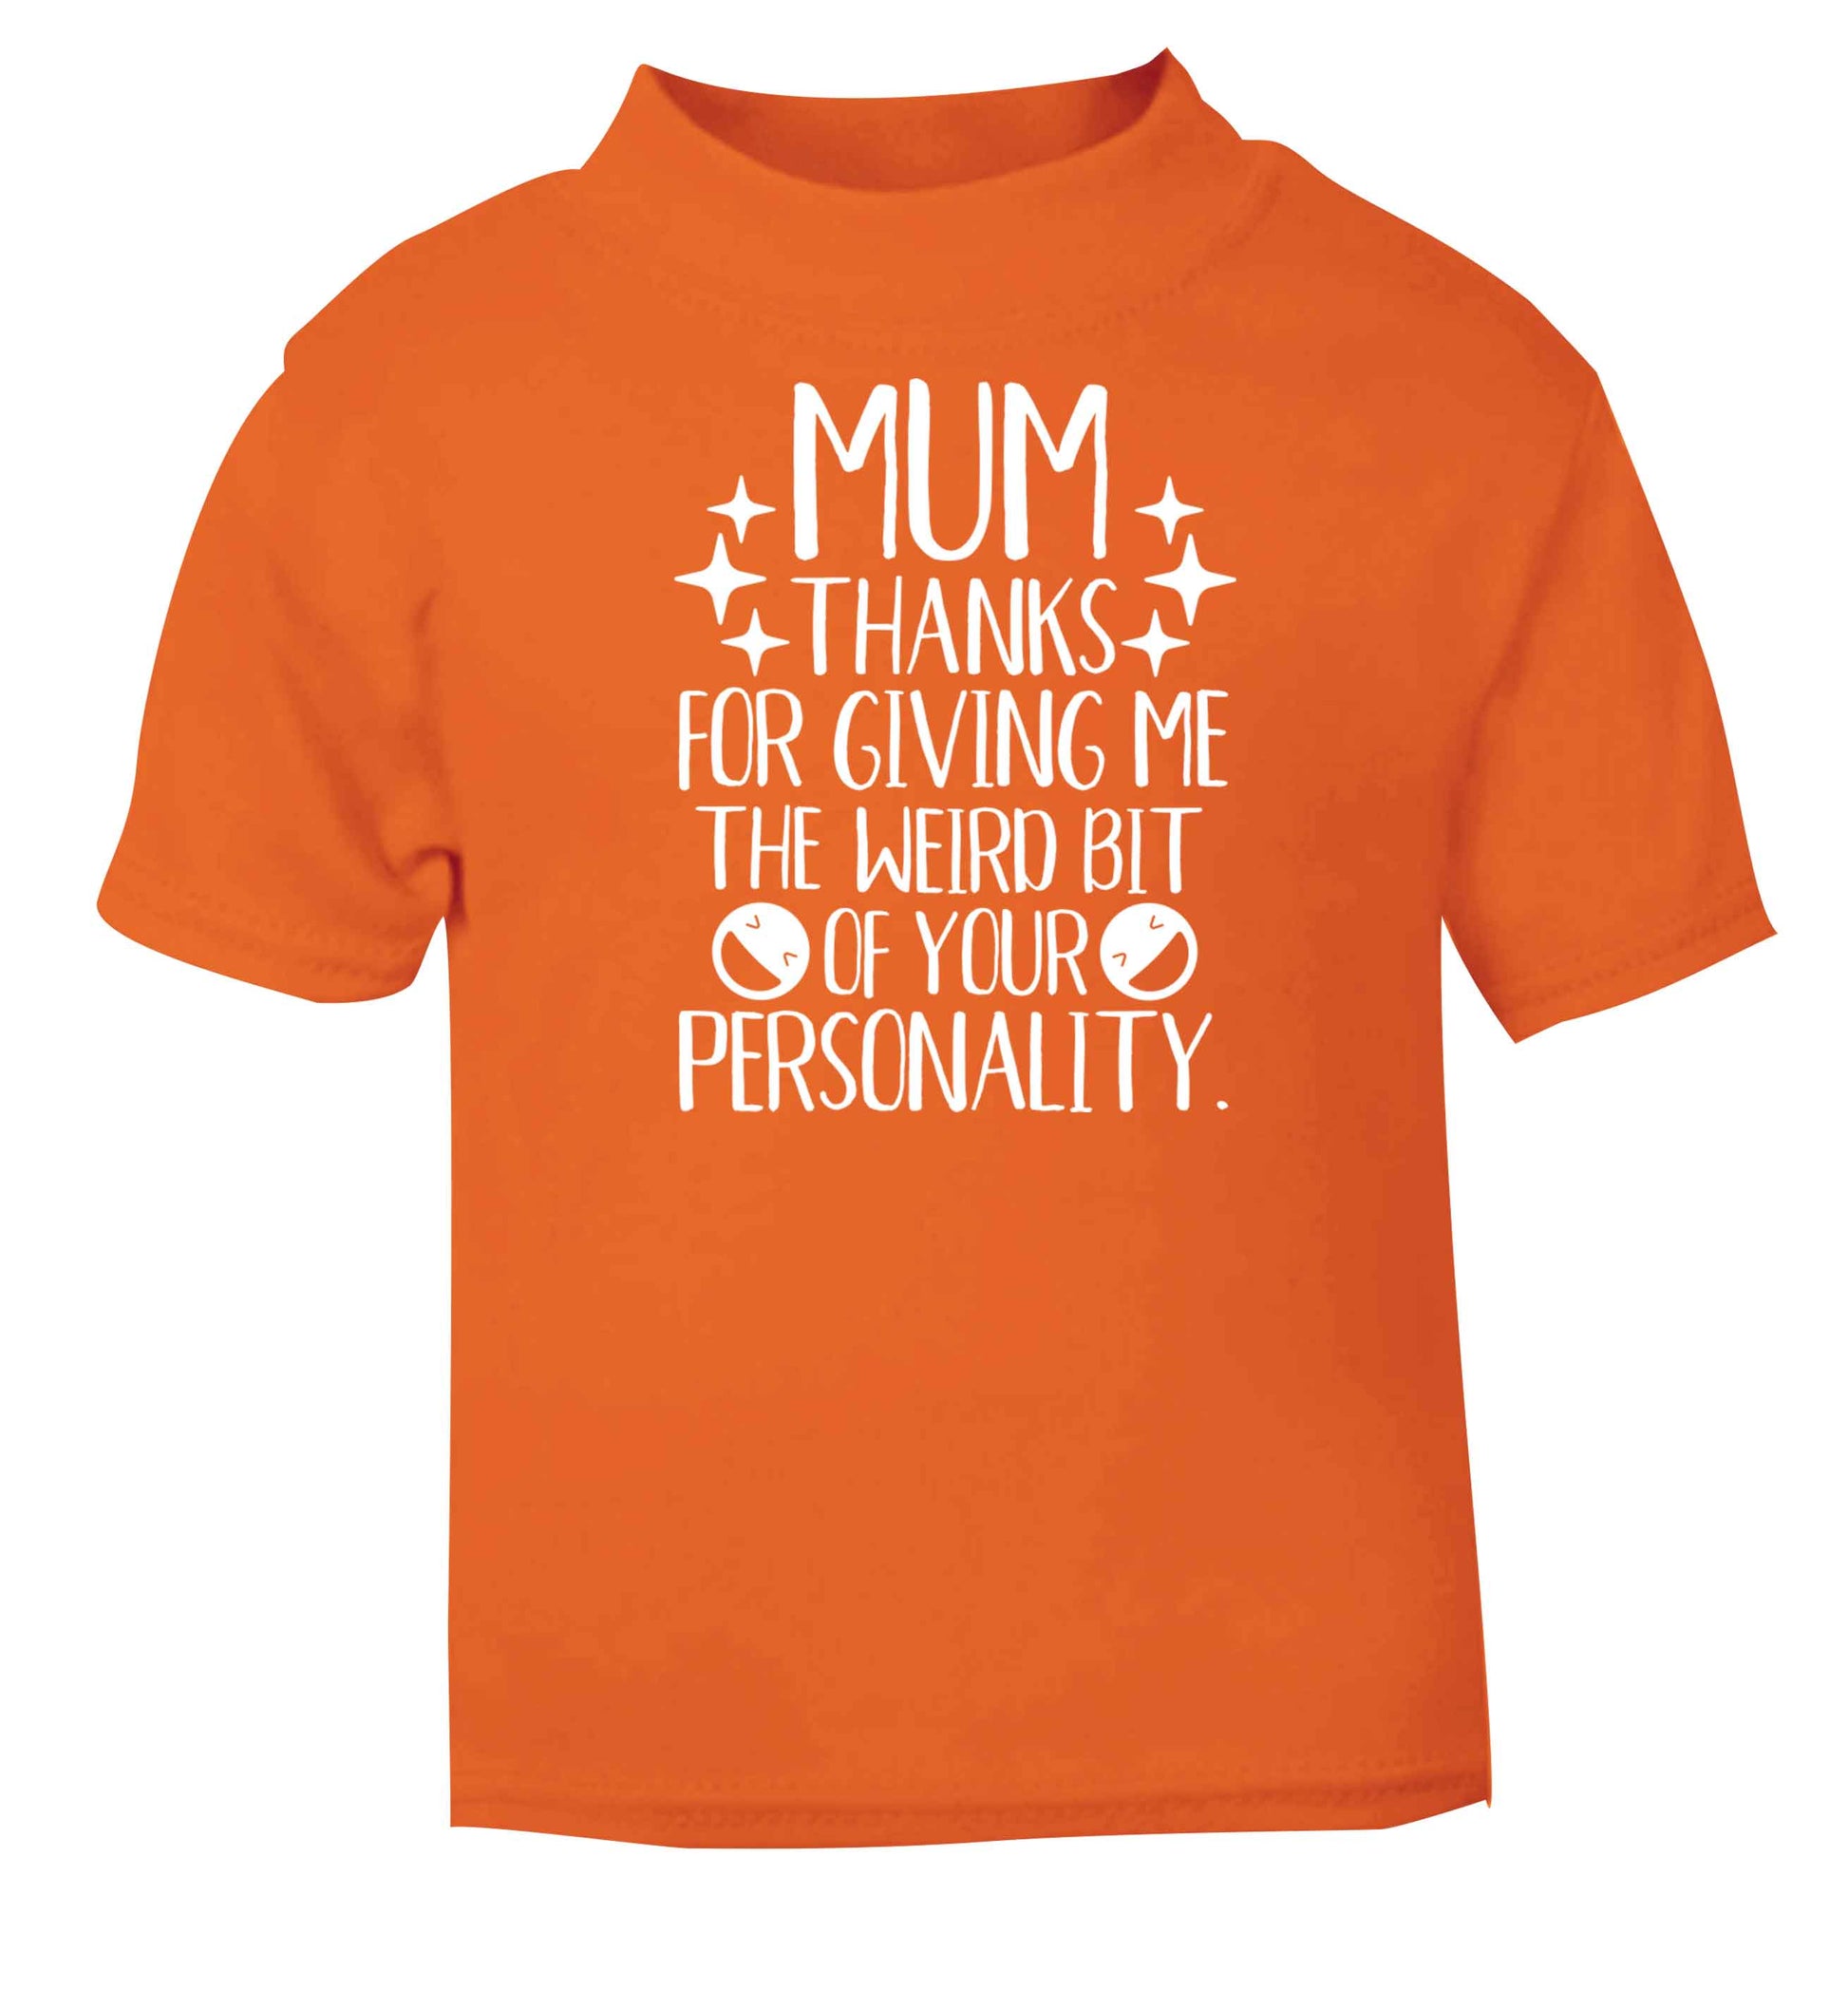 Mum thanks for giving me the weird bit of your personality orange baby toddler Tshirt 2 Years